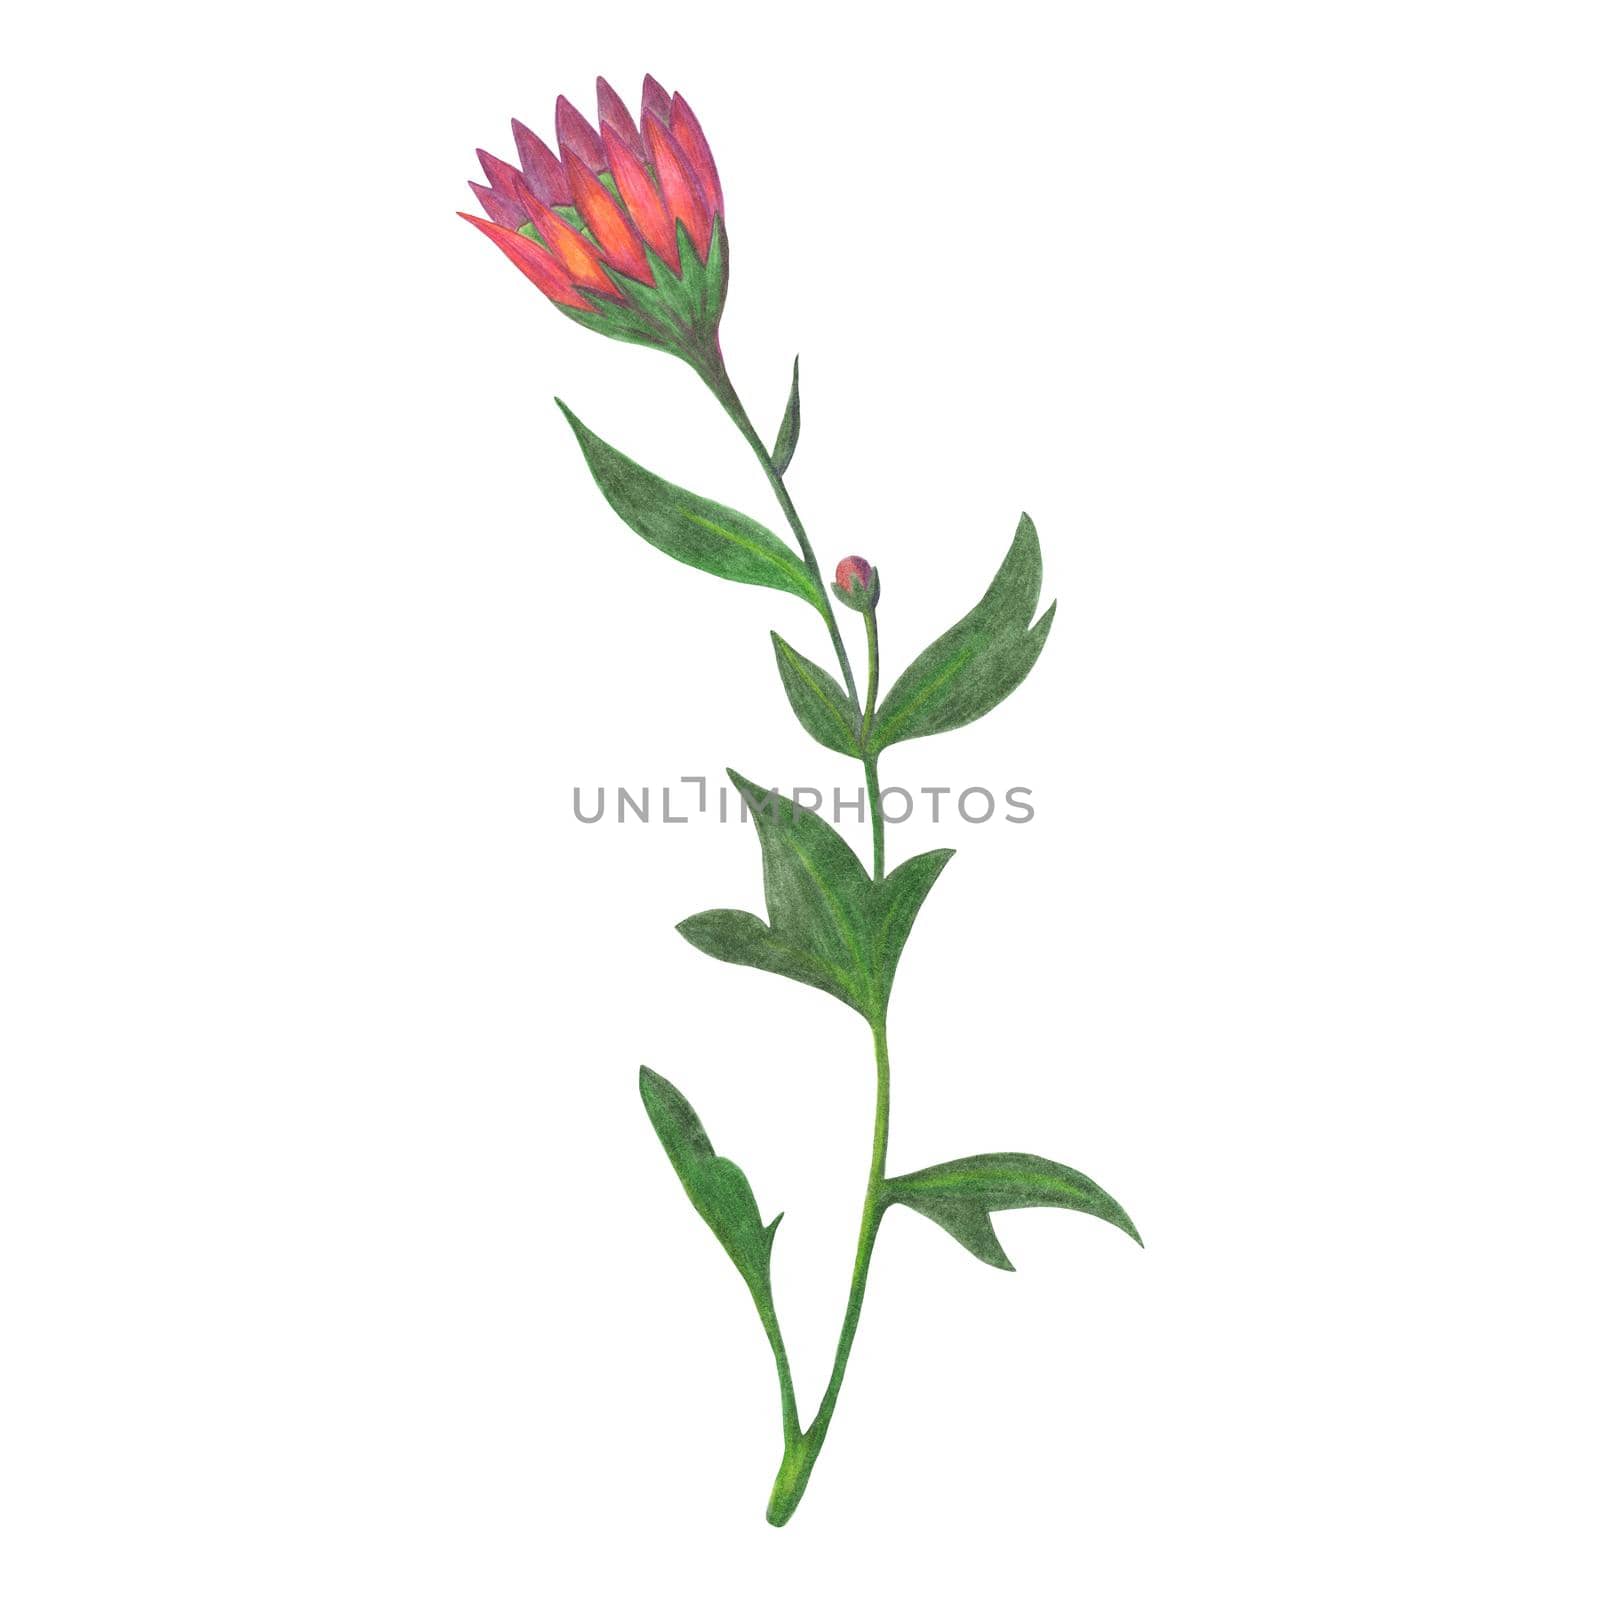 Red Chrysanthemum with Green Leaves Isolated on White Background. Chrysanthemum Flower Element Drawn by Color Pencil.